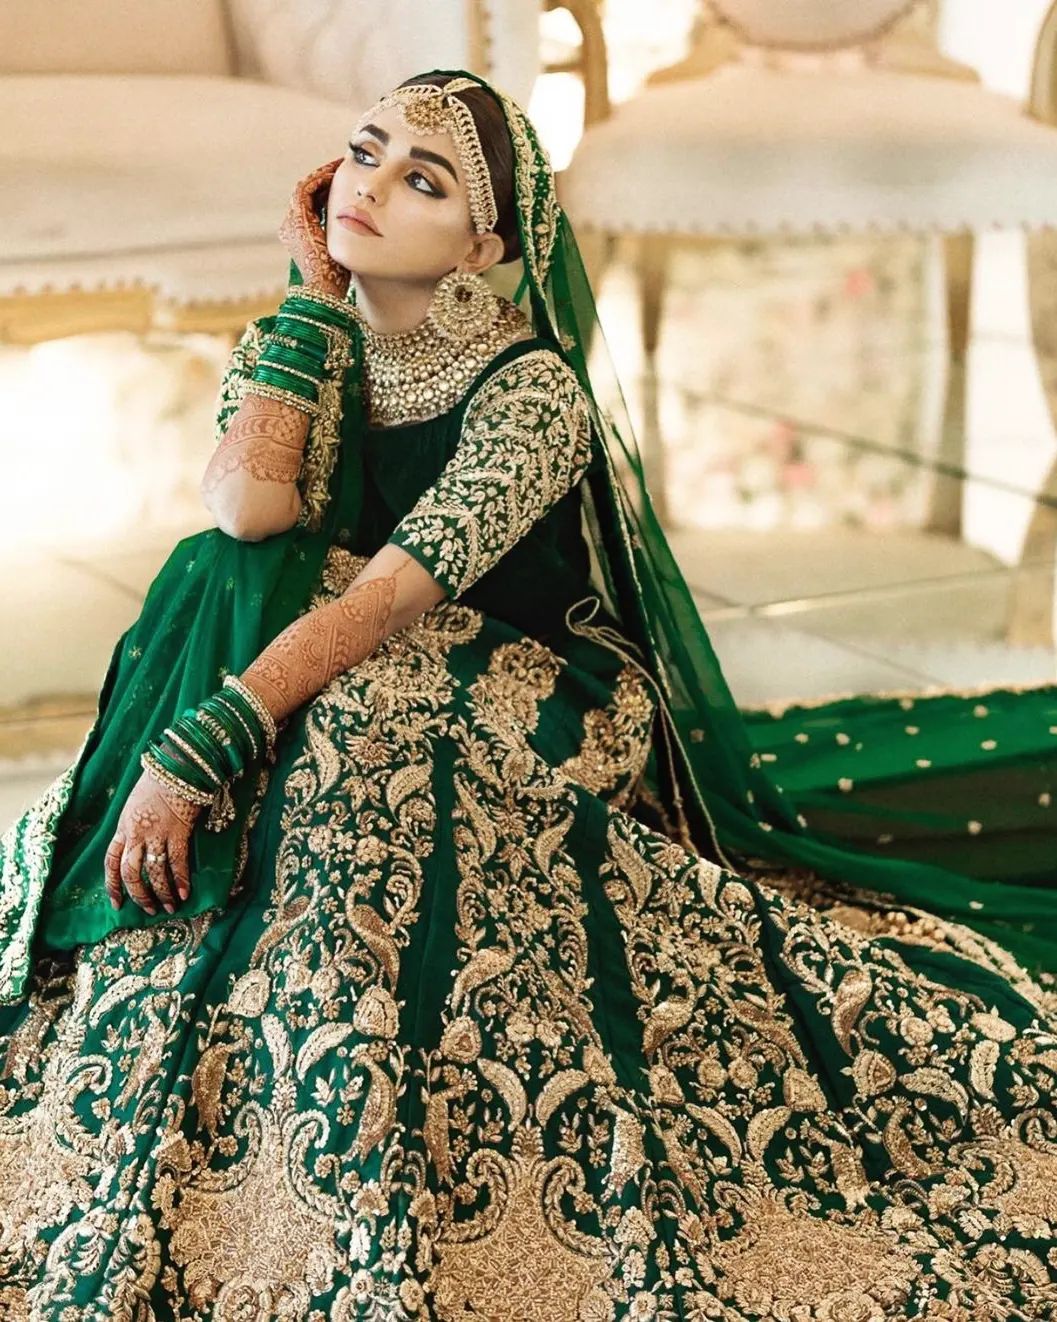 Bottle Green Silk Bridal Lehenga With Heavy Choli- Frilled Daman  Embellished In Zardosi And Pearl-Sequins Butti's - Aara Couture